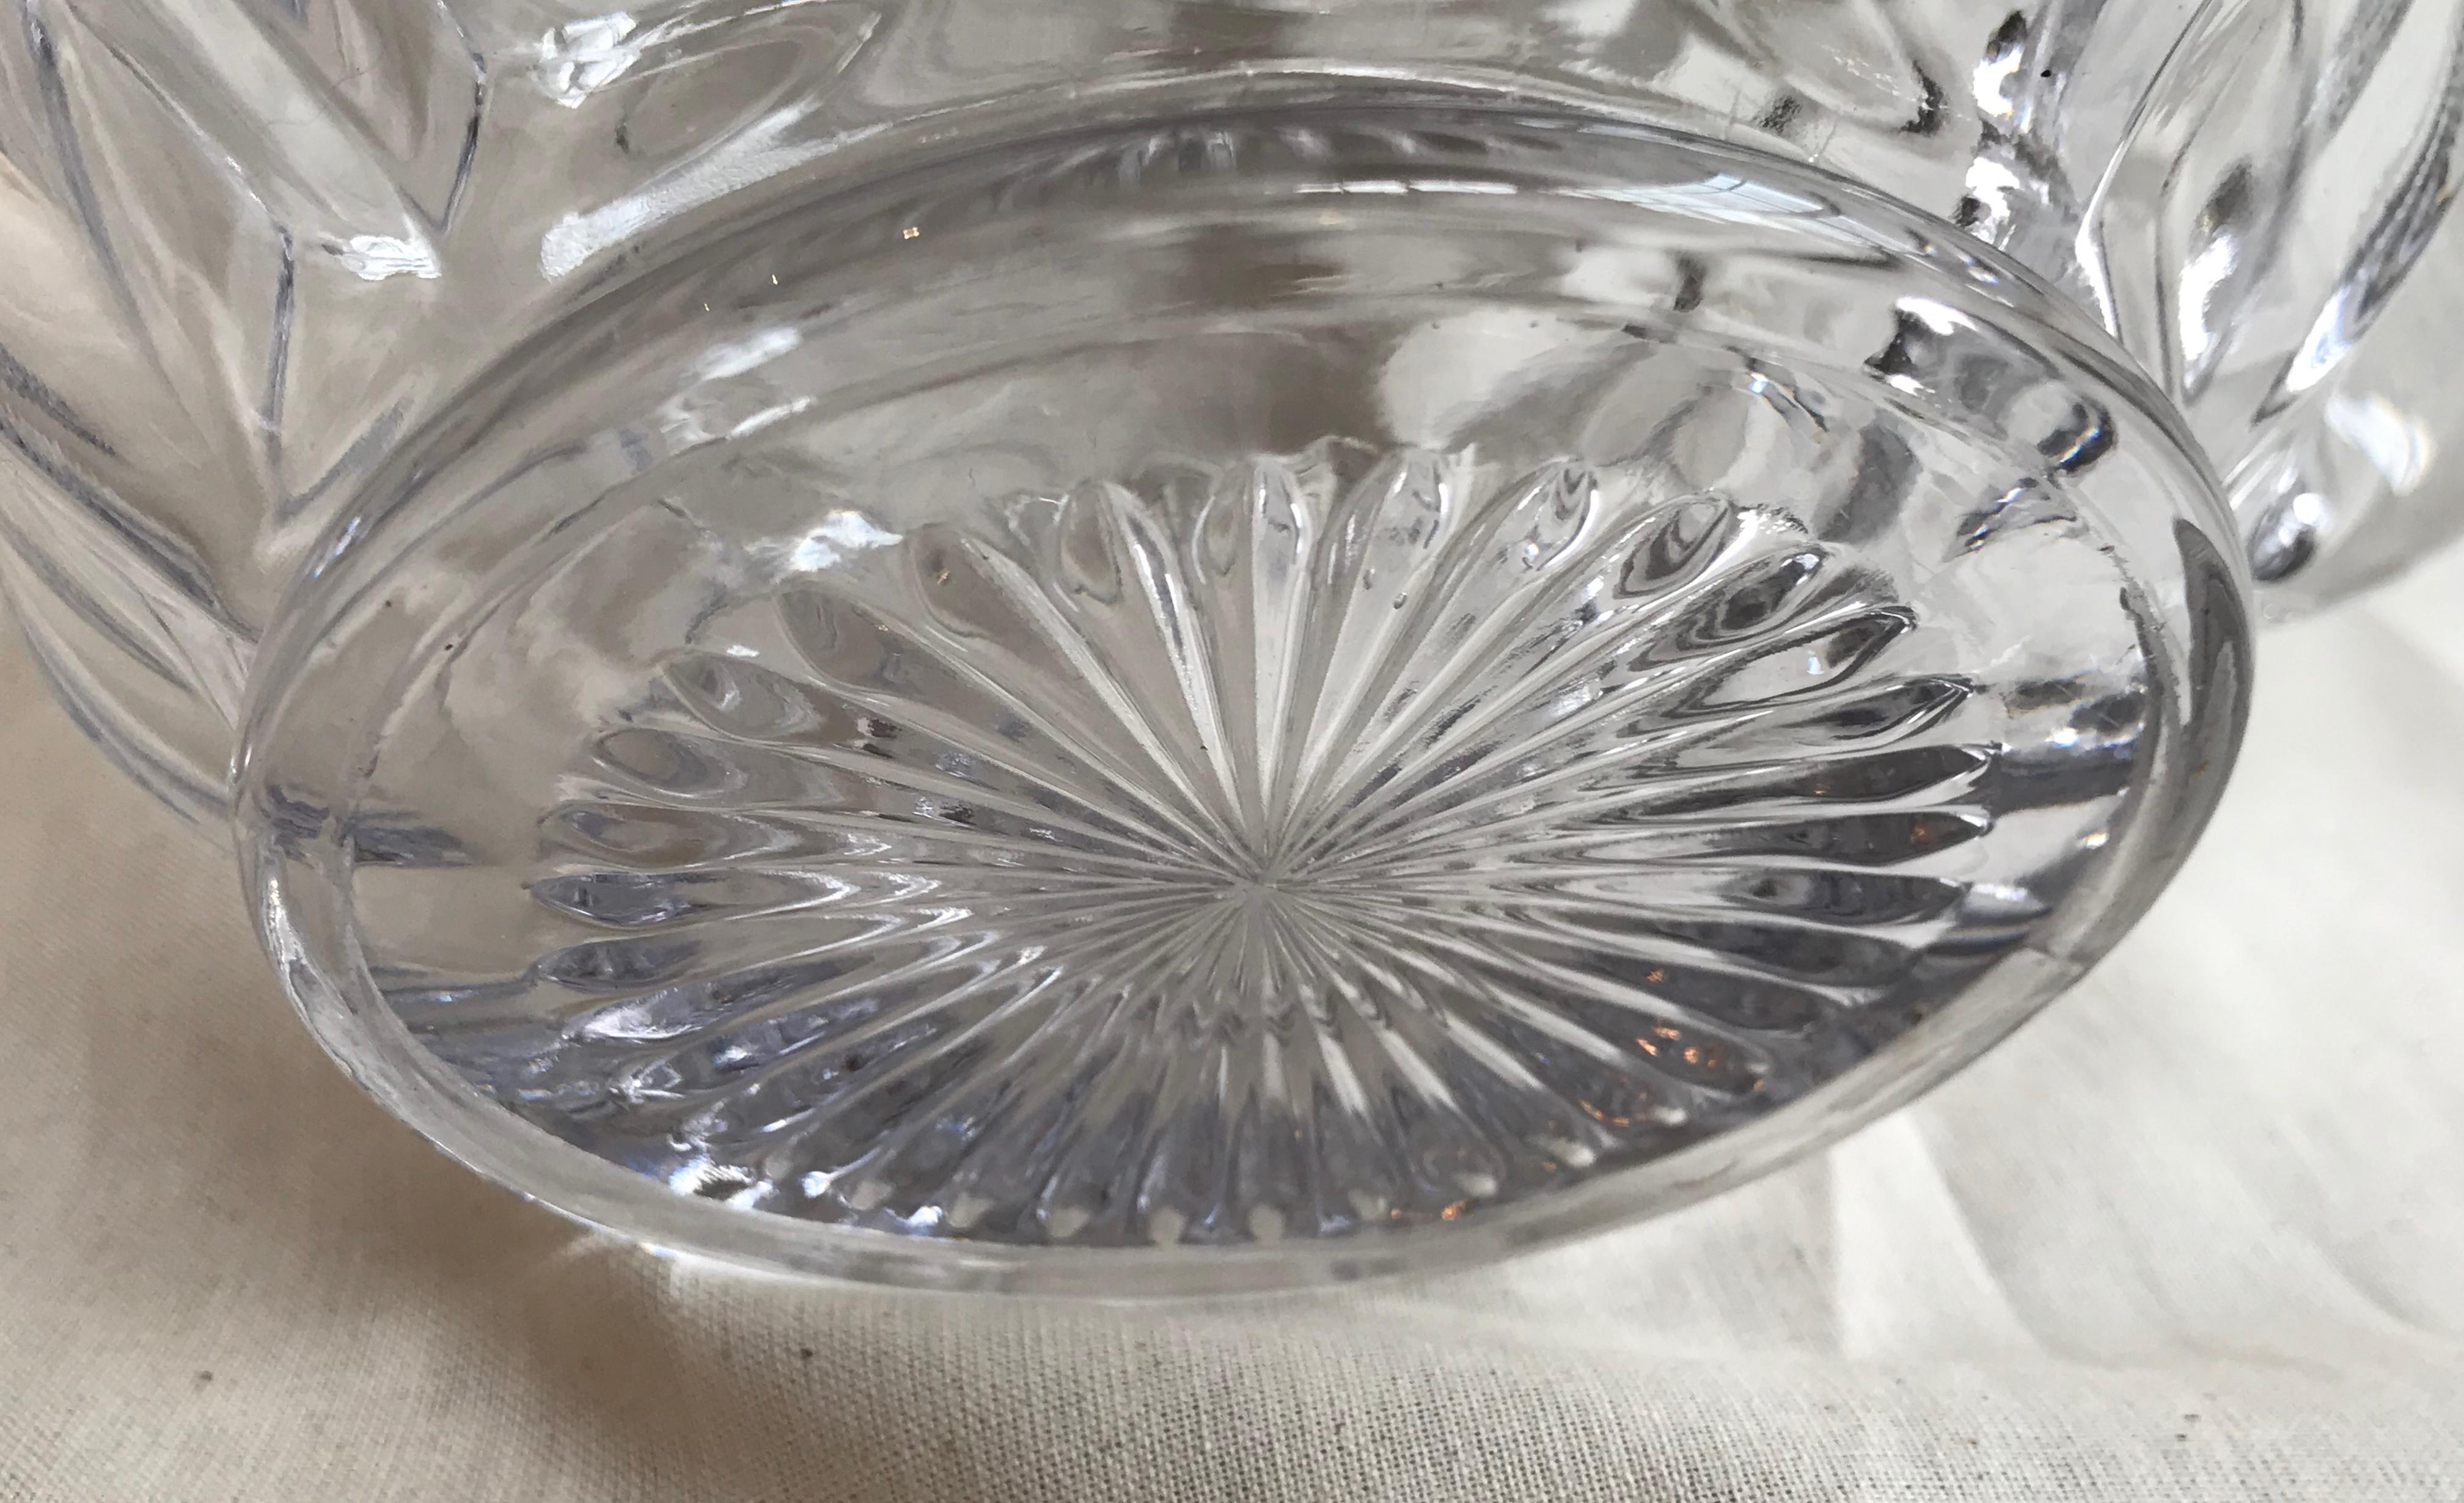 Italian glass water pitcher in very good condition. The wide melon shaped body make this pitcher perfect for serving drinks with ice such as lemonade or iced tea, circa 1950.